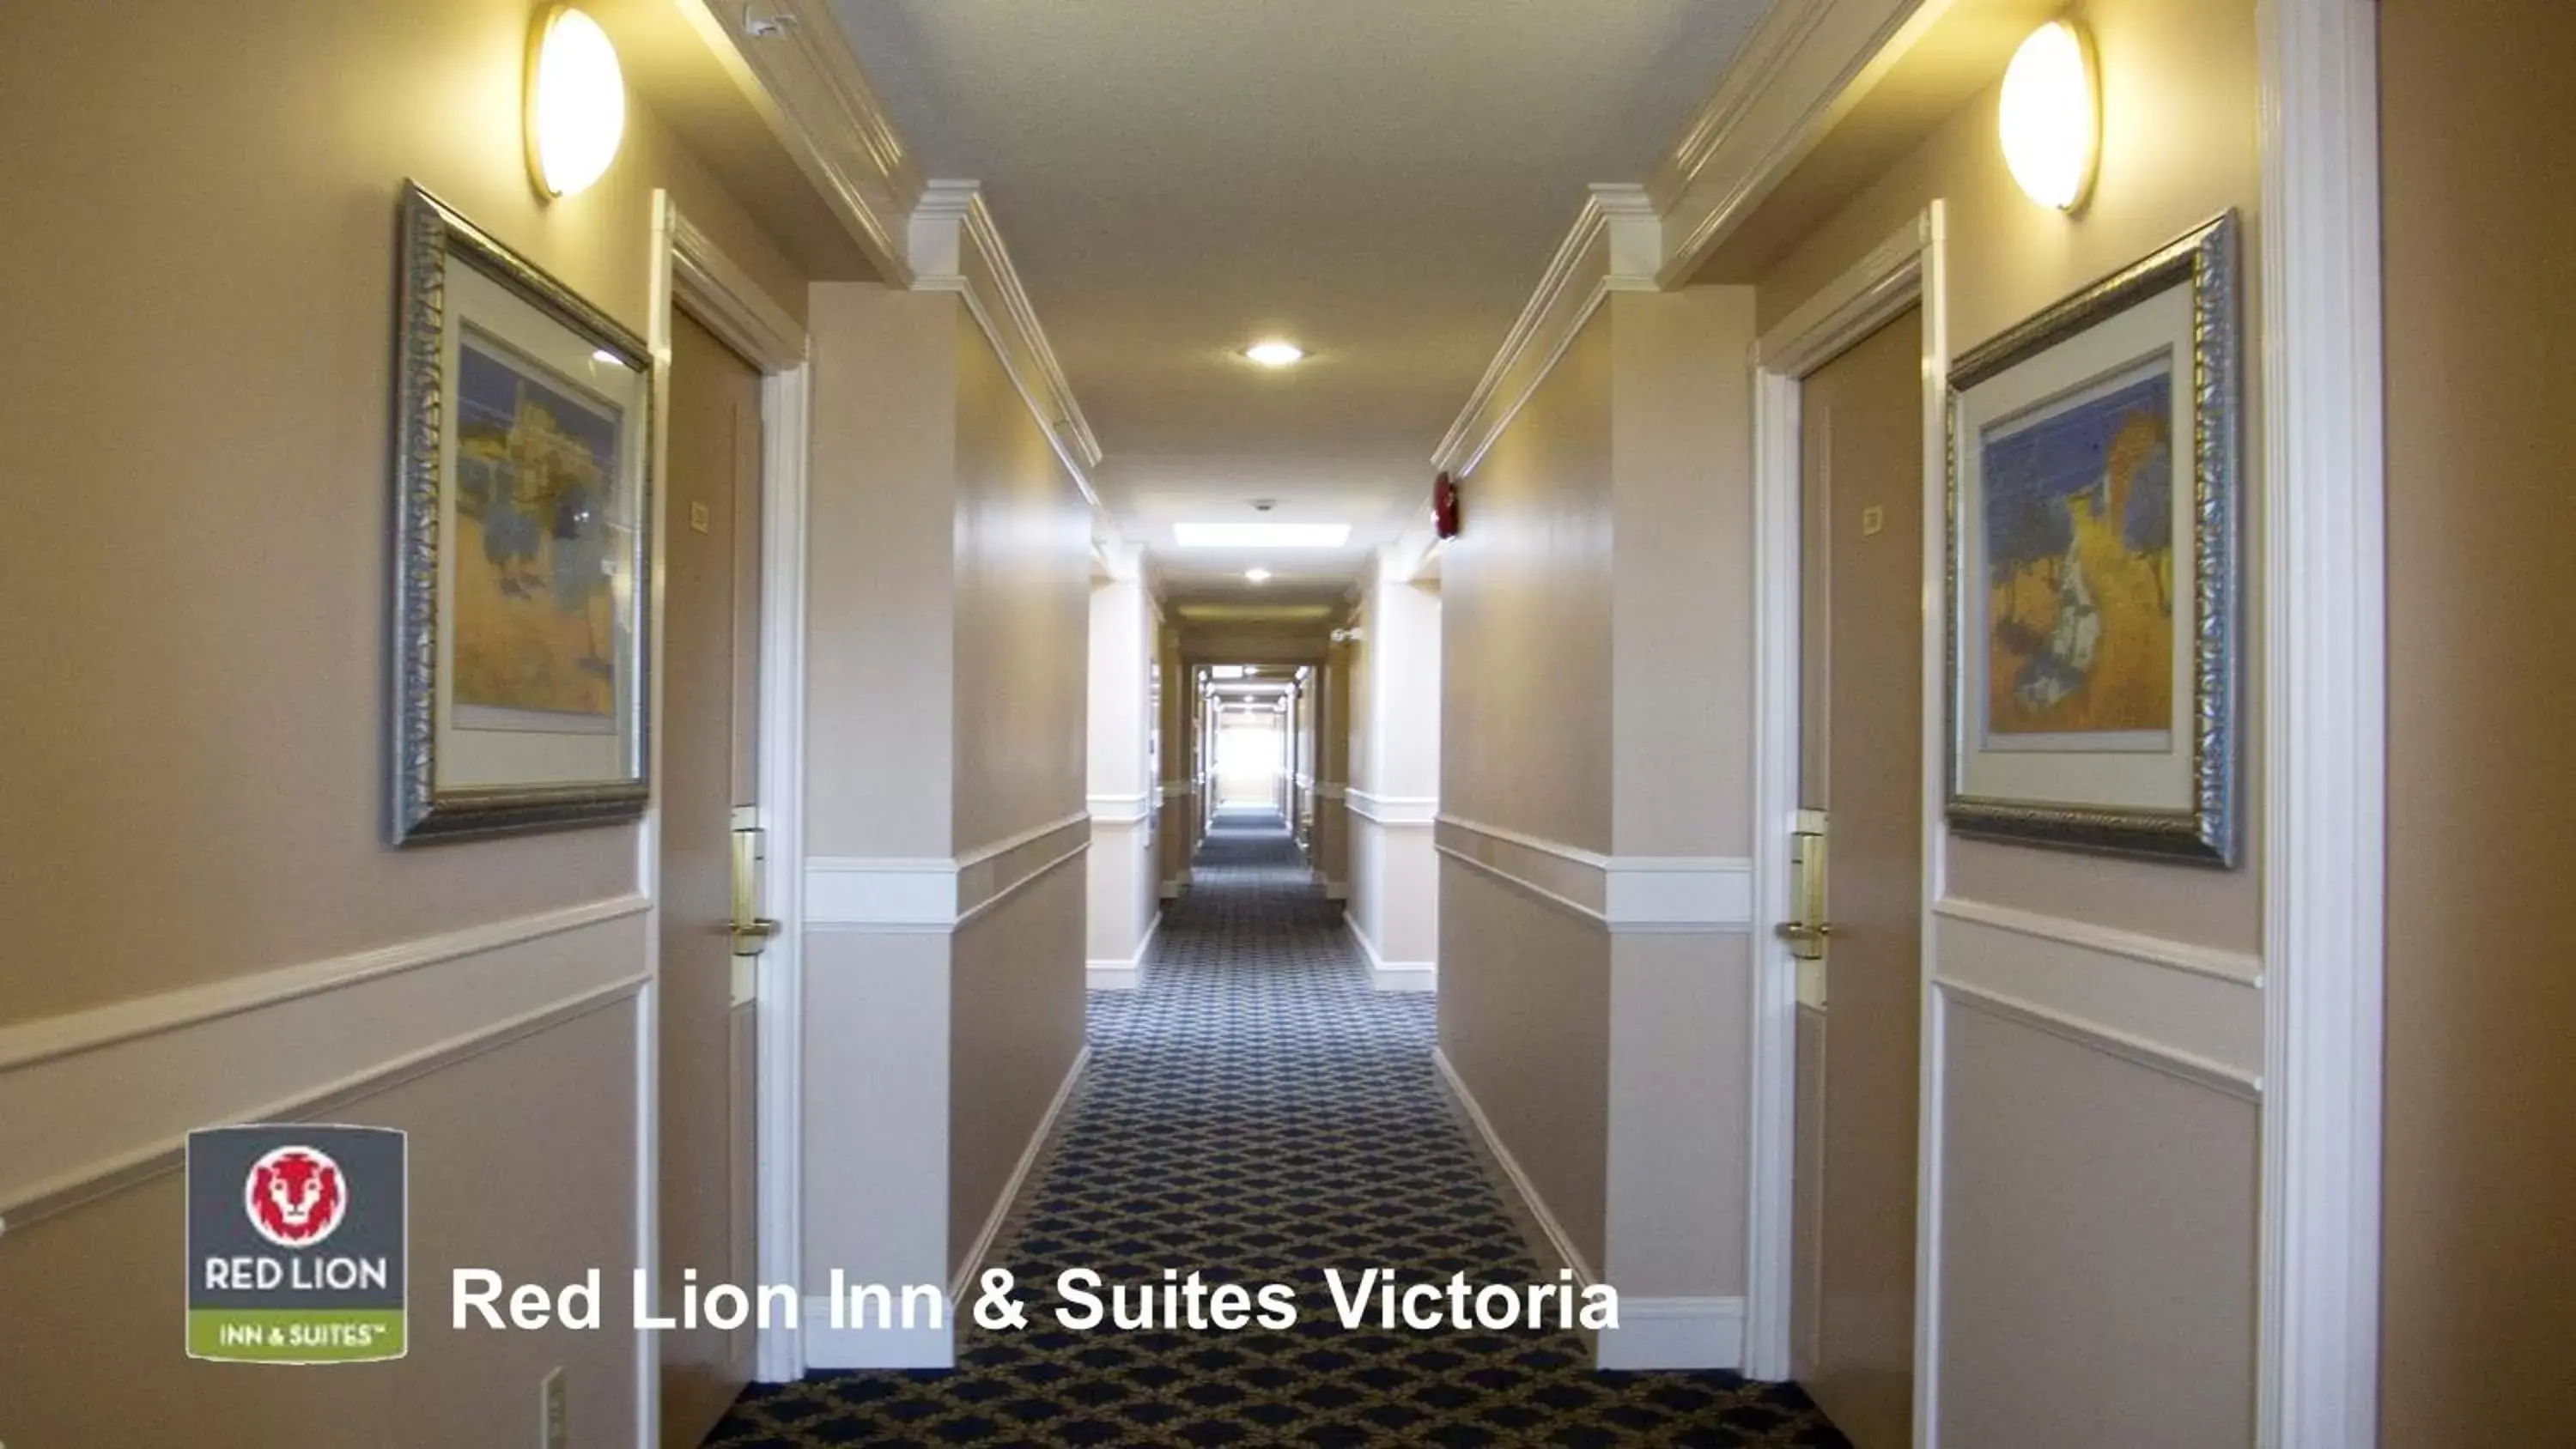 Decorative detail in Red Lion Inn and Suites Victoria